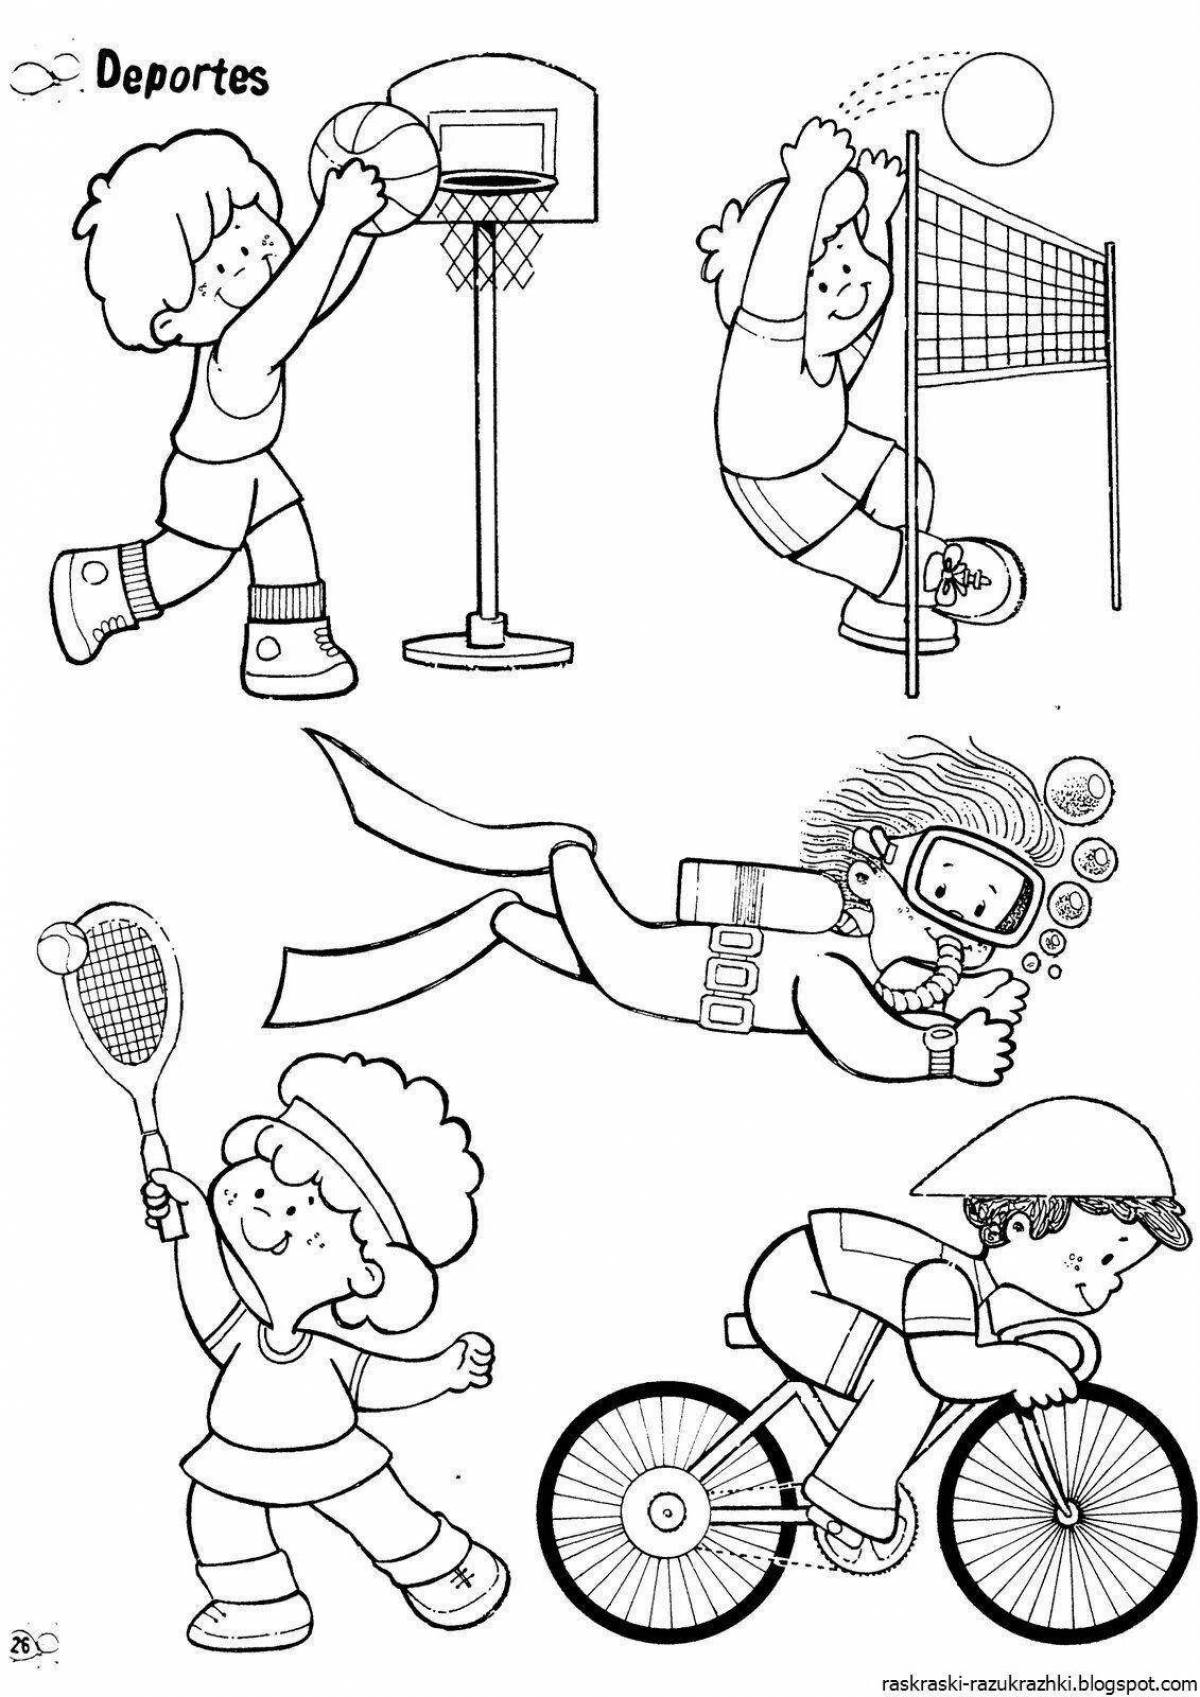 Playful healthy lifestyle coloring page for kids